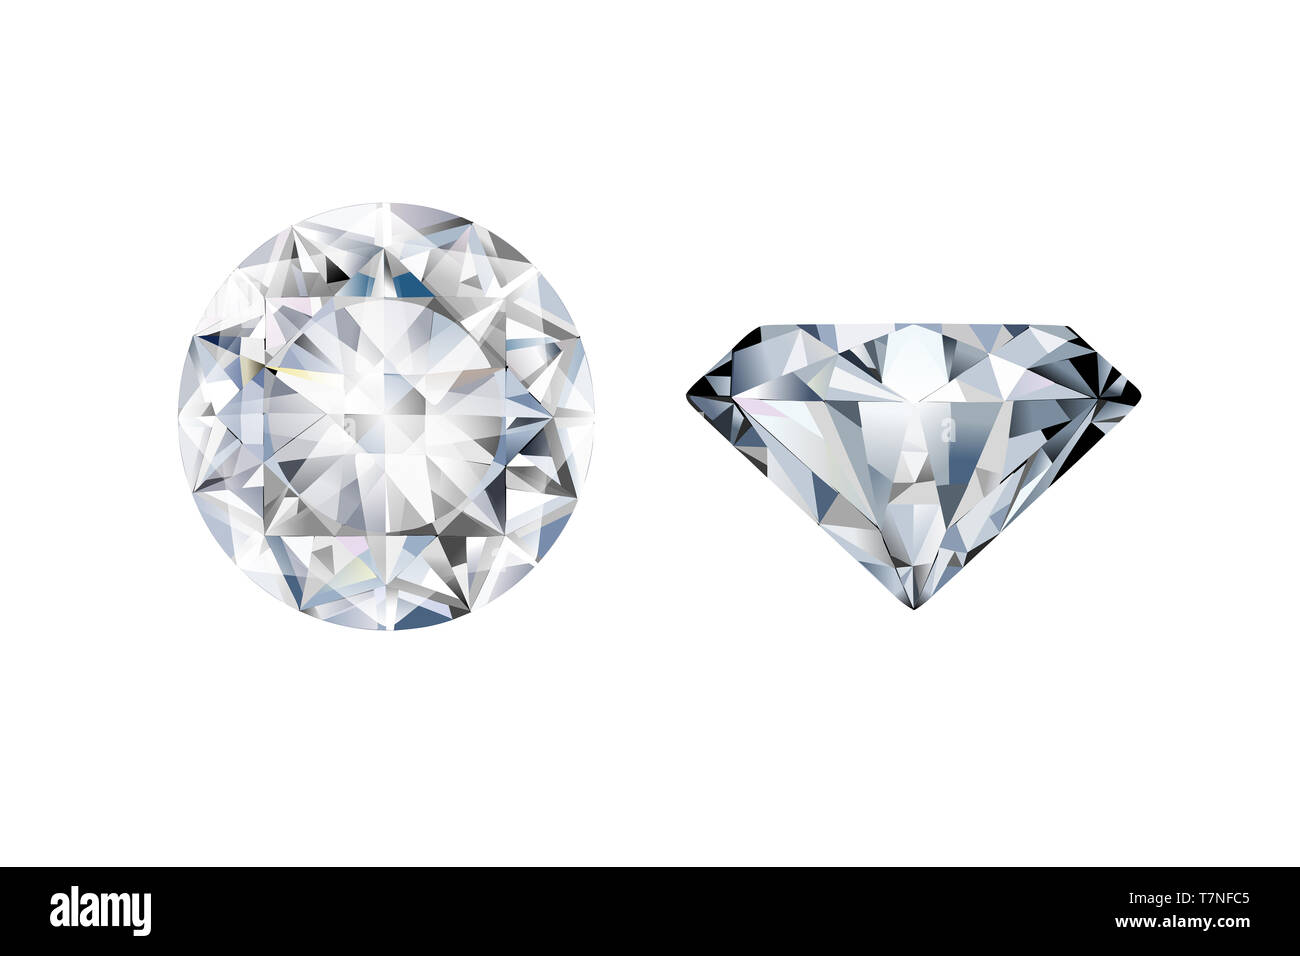 Two realistic diamonds in different perspectives on a white background Stock Photo